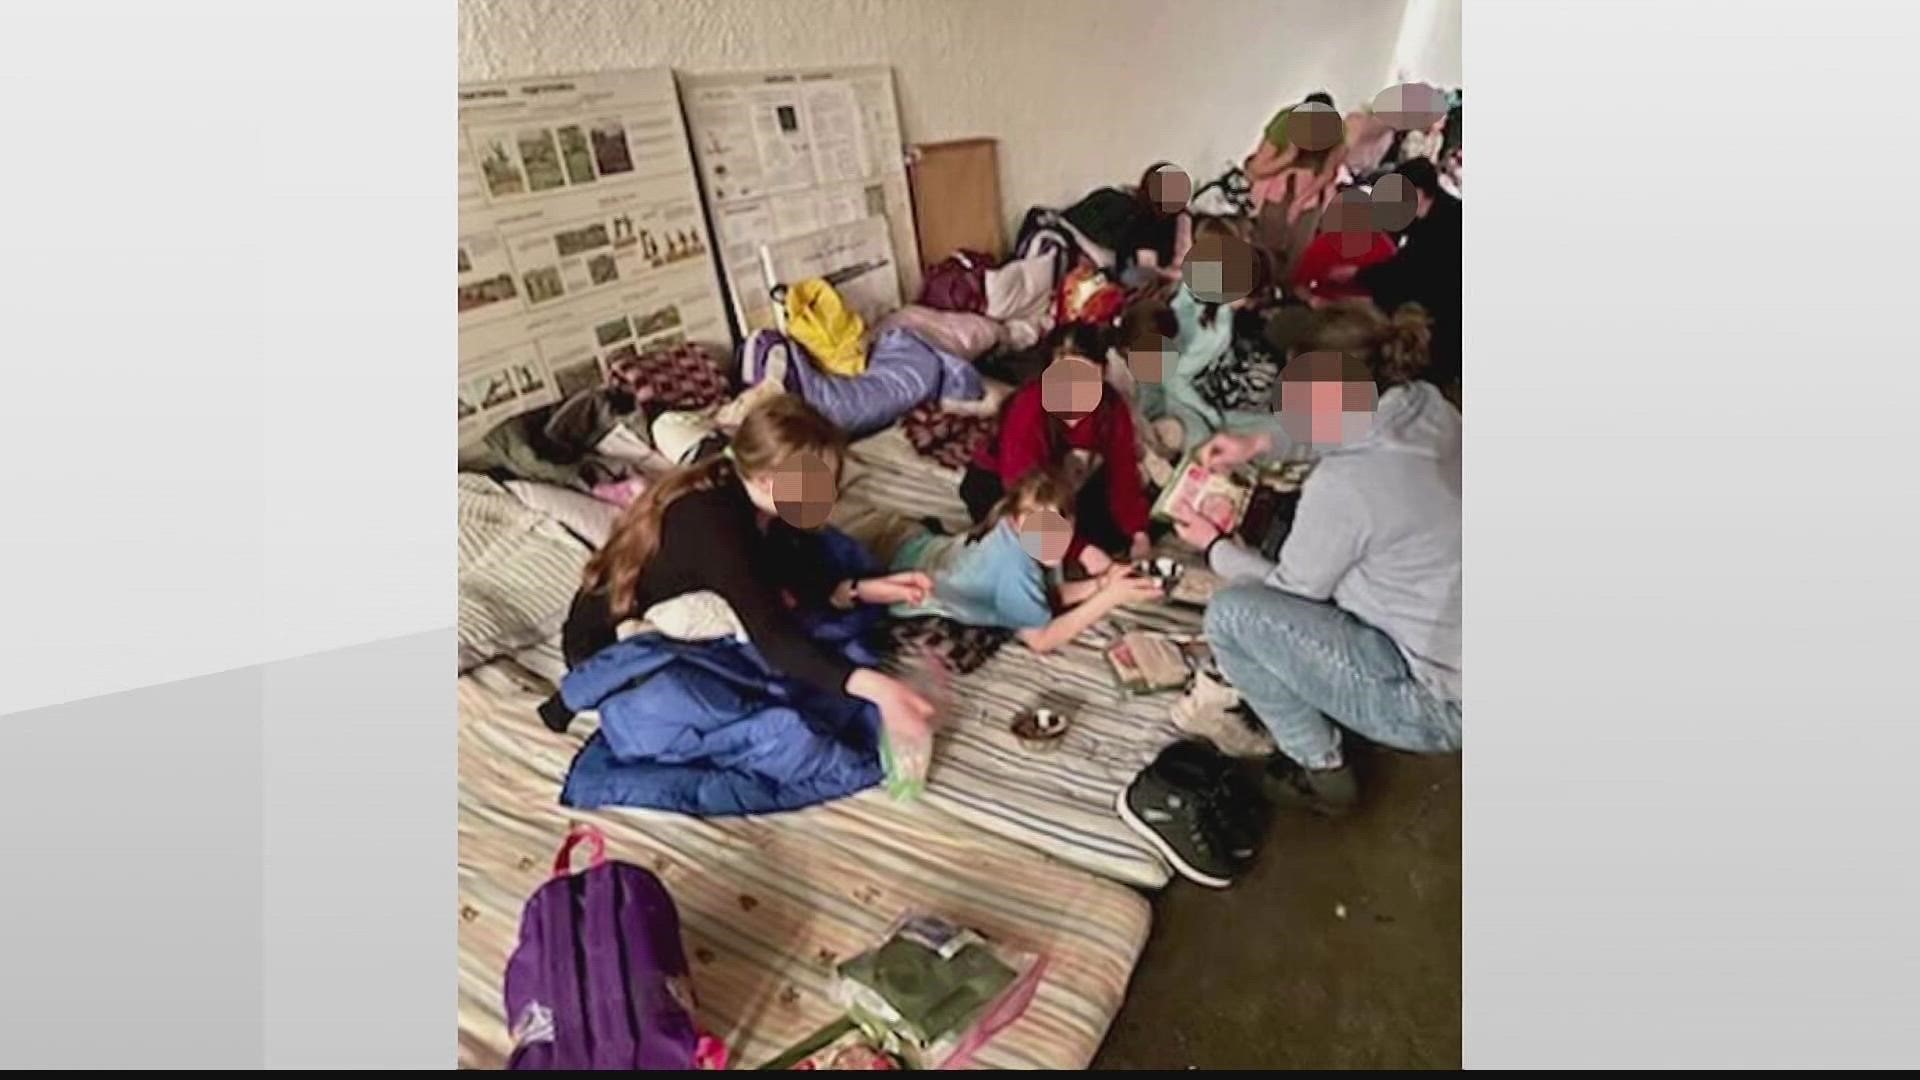 A non-profit in Atlanta has been working to get about 20 kids in an orphanage in Kiev across the border to safety. They said it has been a dangerous job.